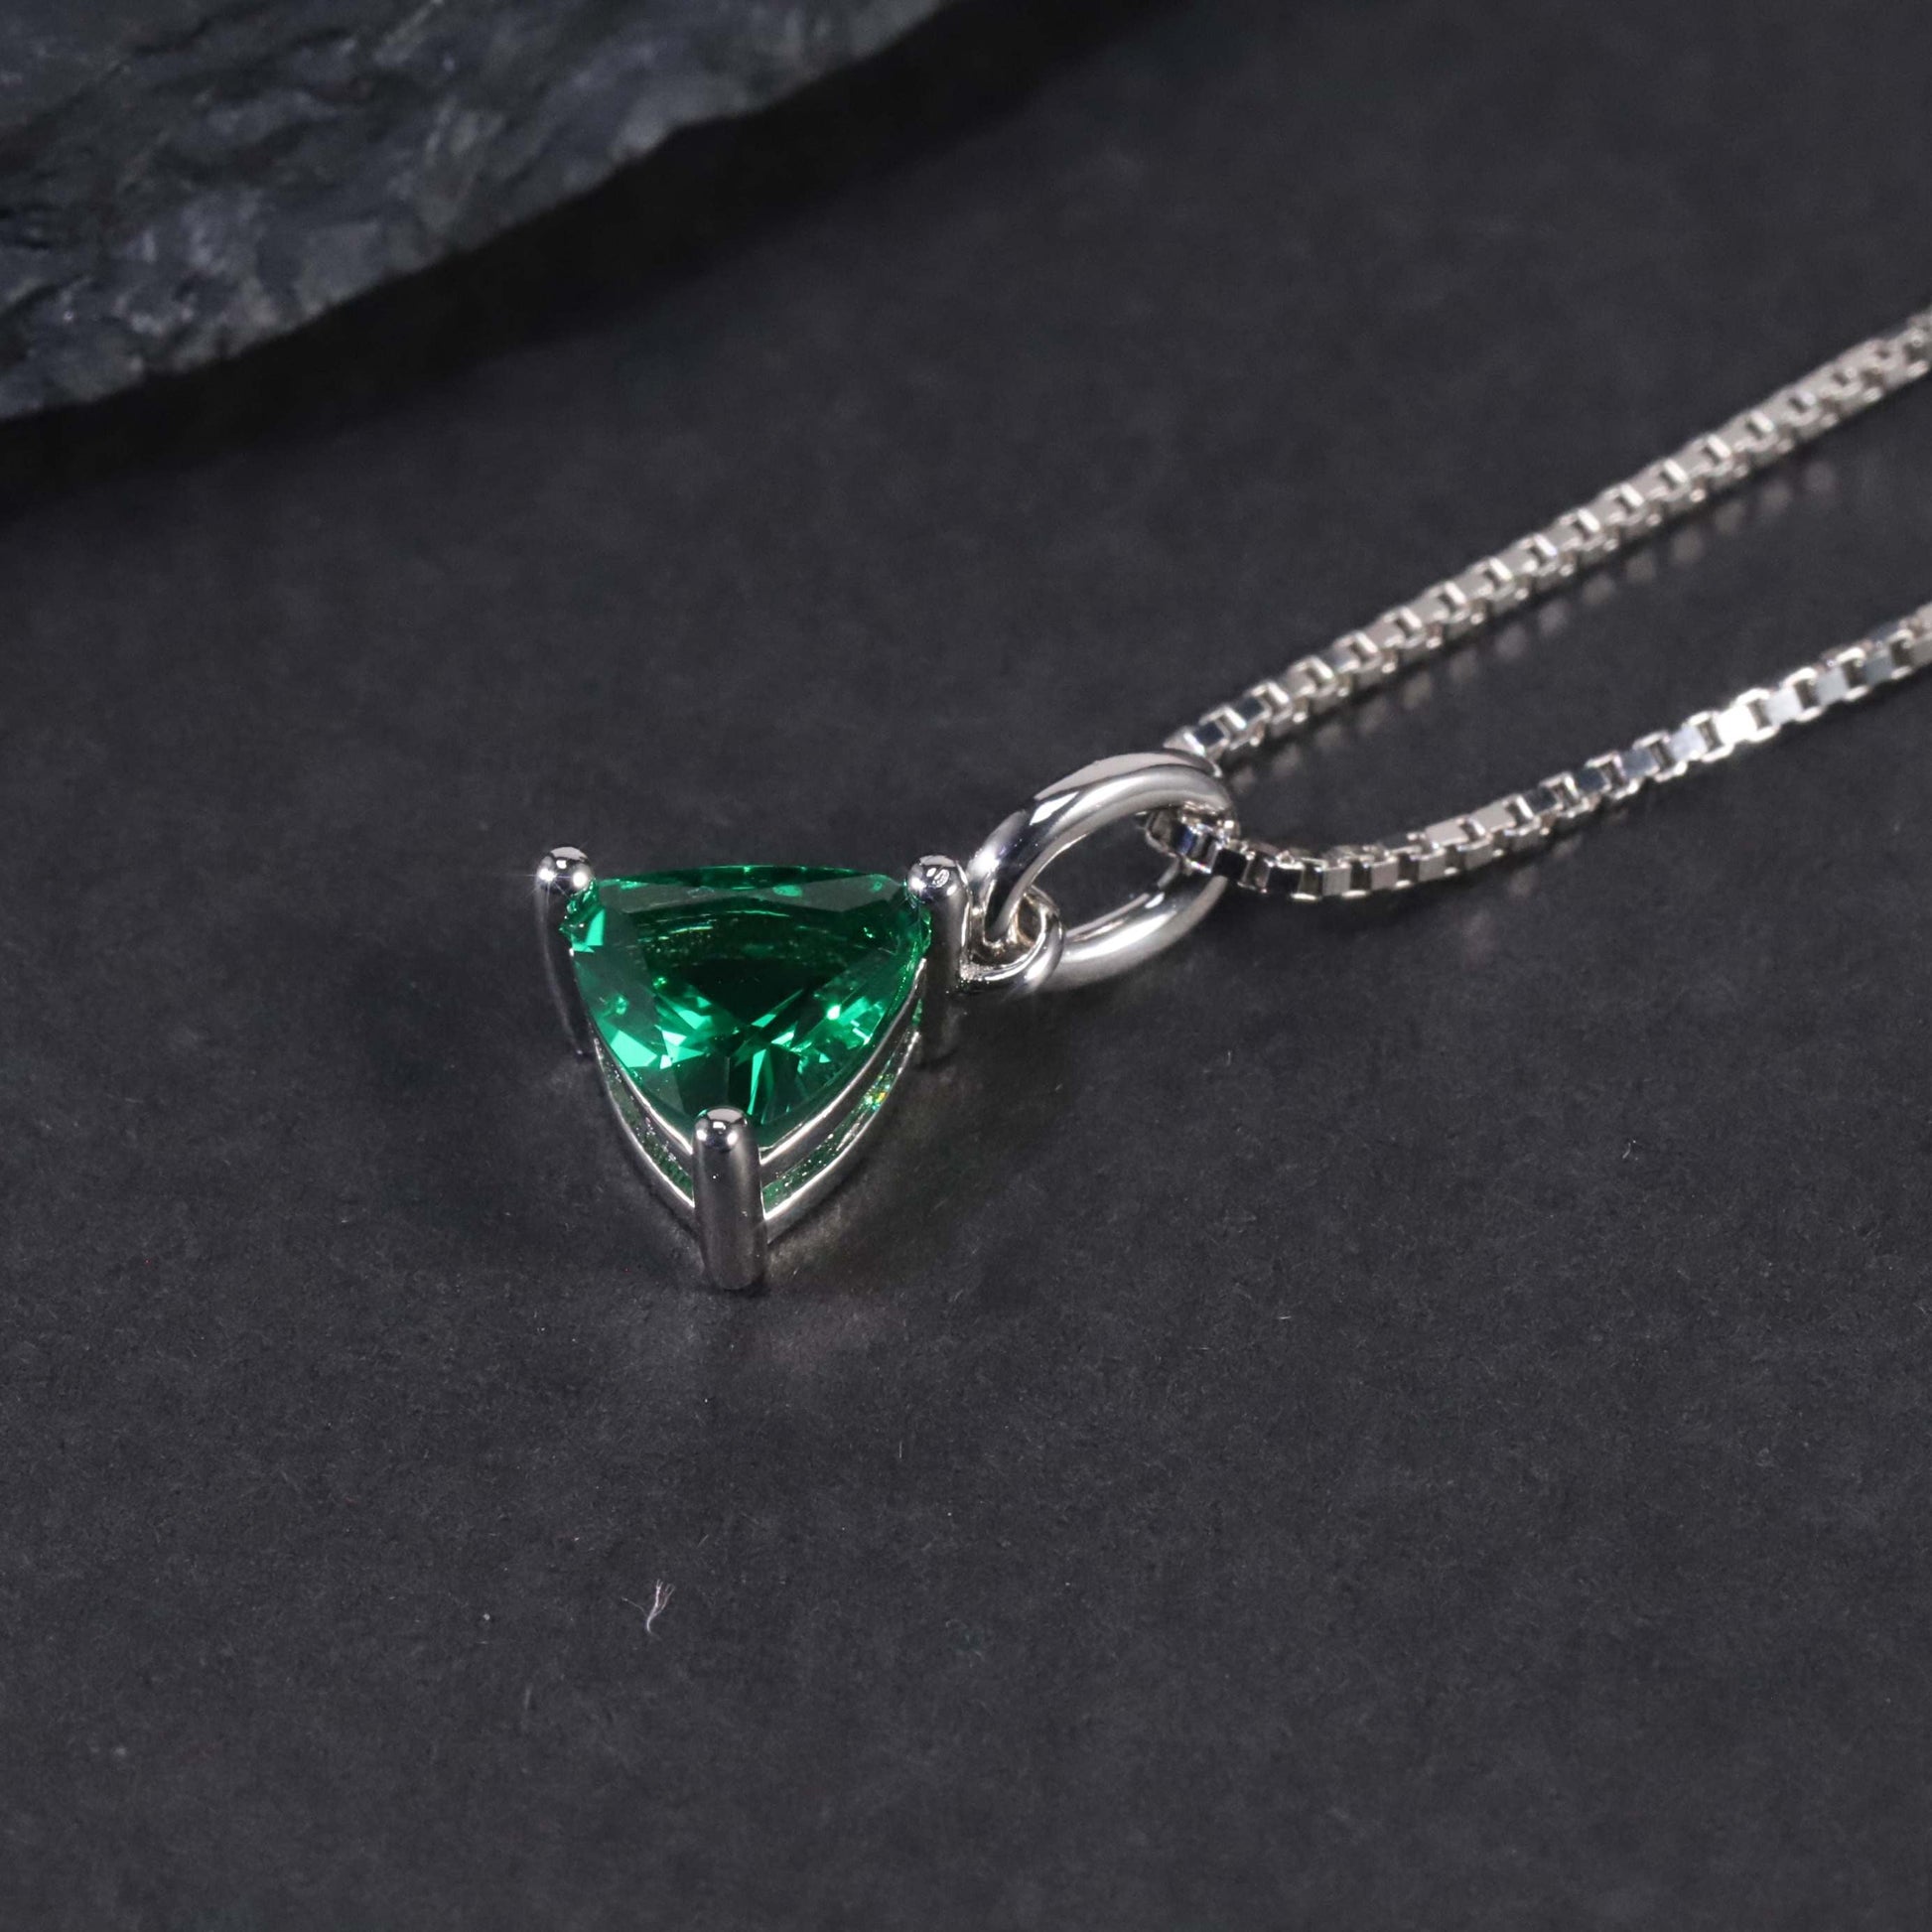 Side view of silver trillion cut emerald pendant on dark background